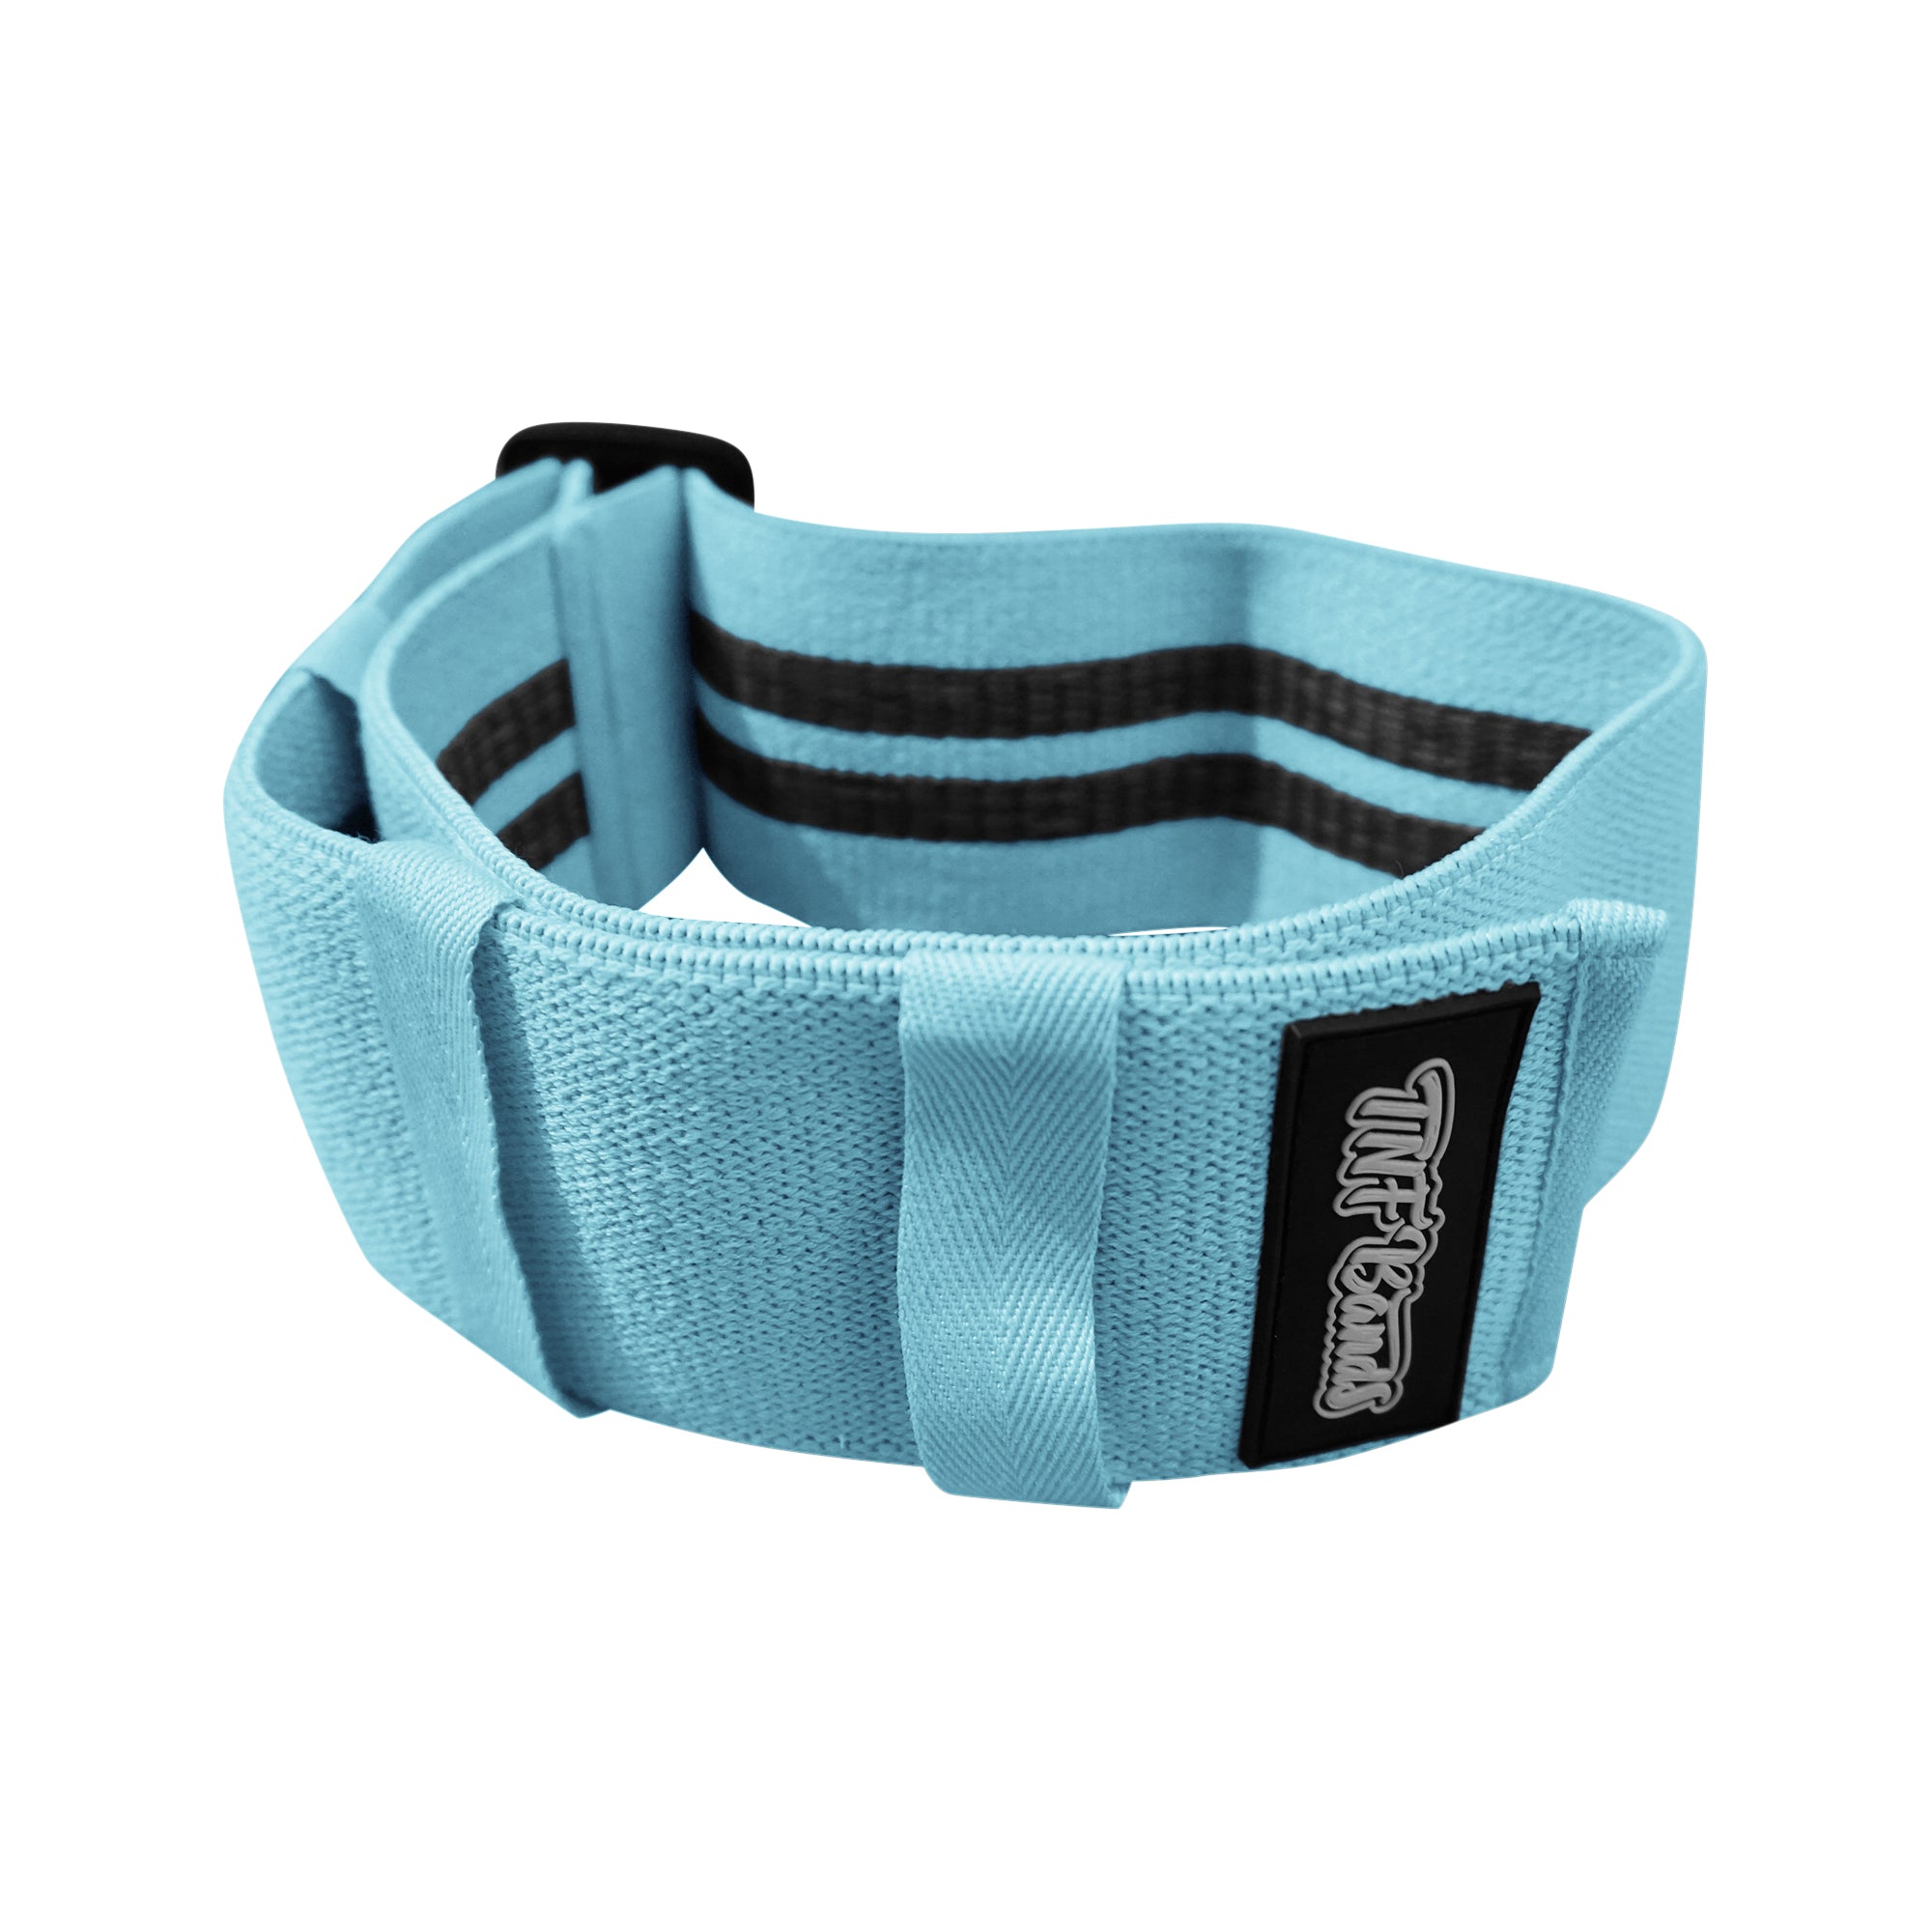 TNF Bands Adjustable Resistance Band 1 band TNF Bands Top Nutrition Canada